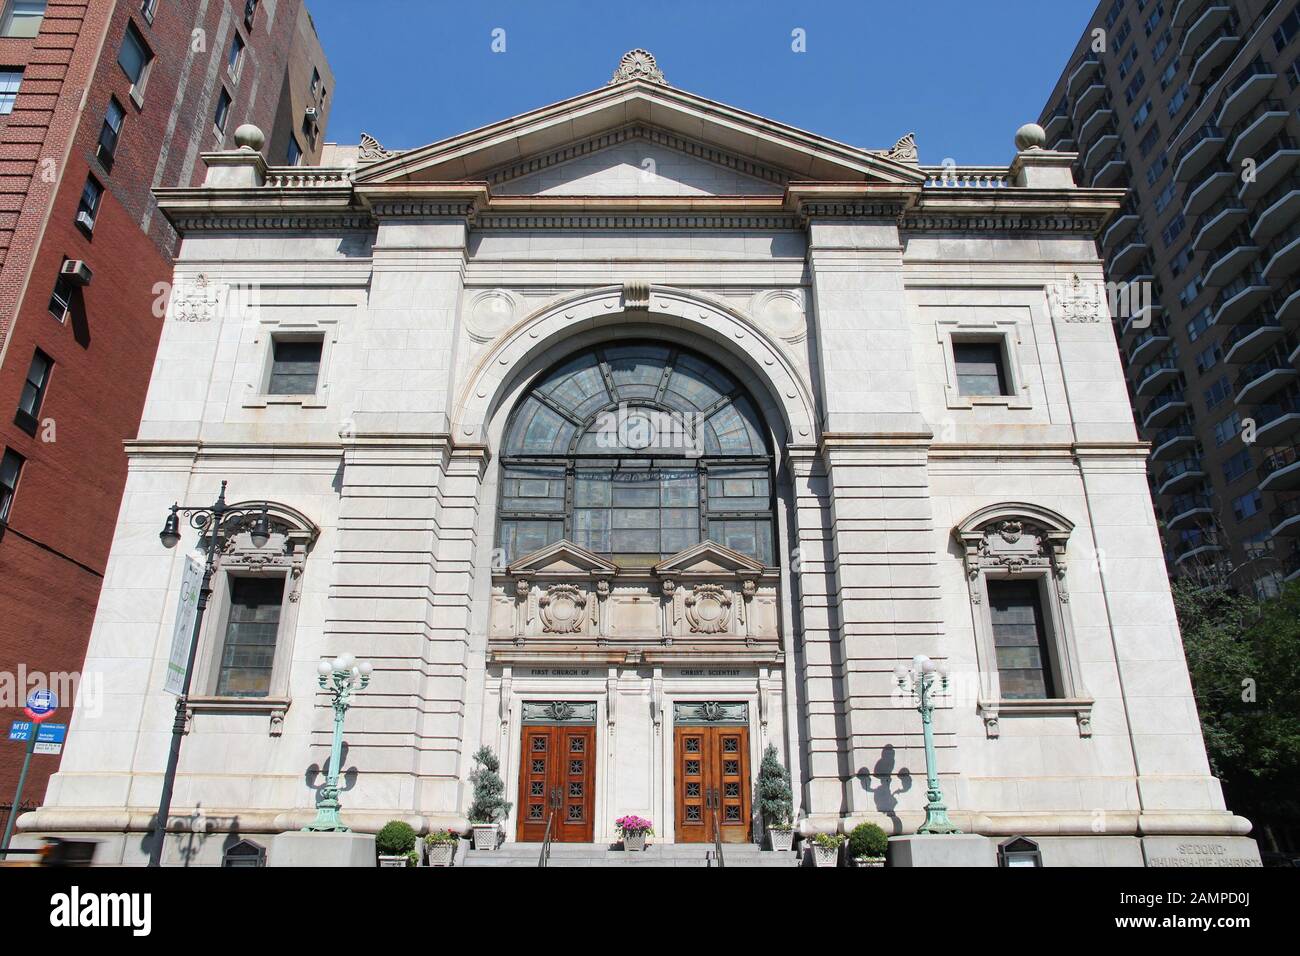 NEW YORK, USA - JULY 6, 2013: First Church of Christ, Scientist at Central Park West in New York. The church was built in 1901 and is registered as Ce Stock Photo